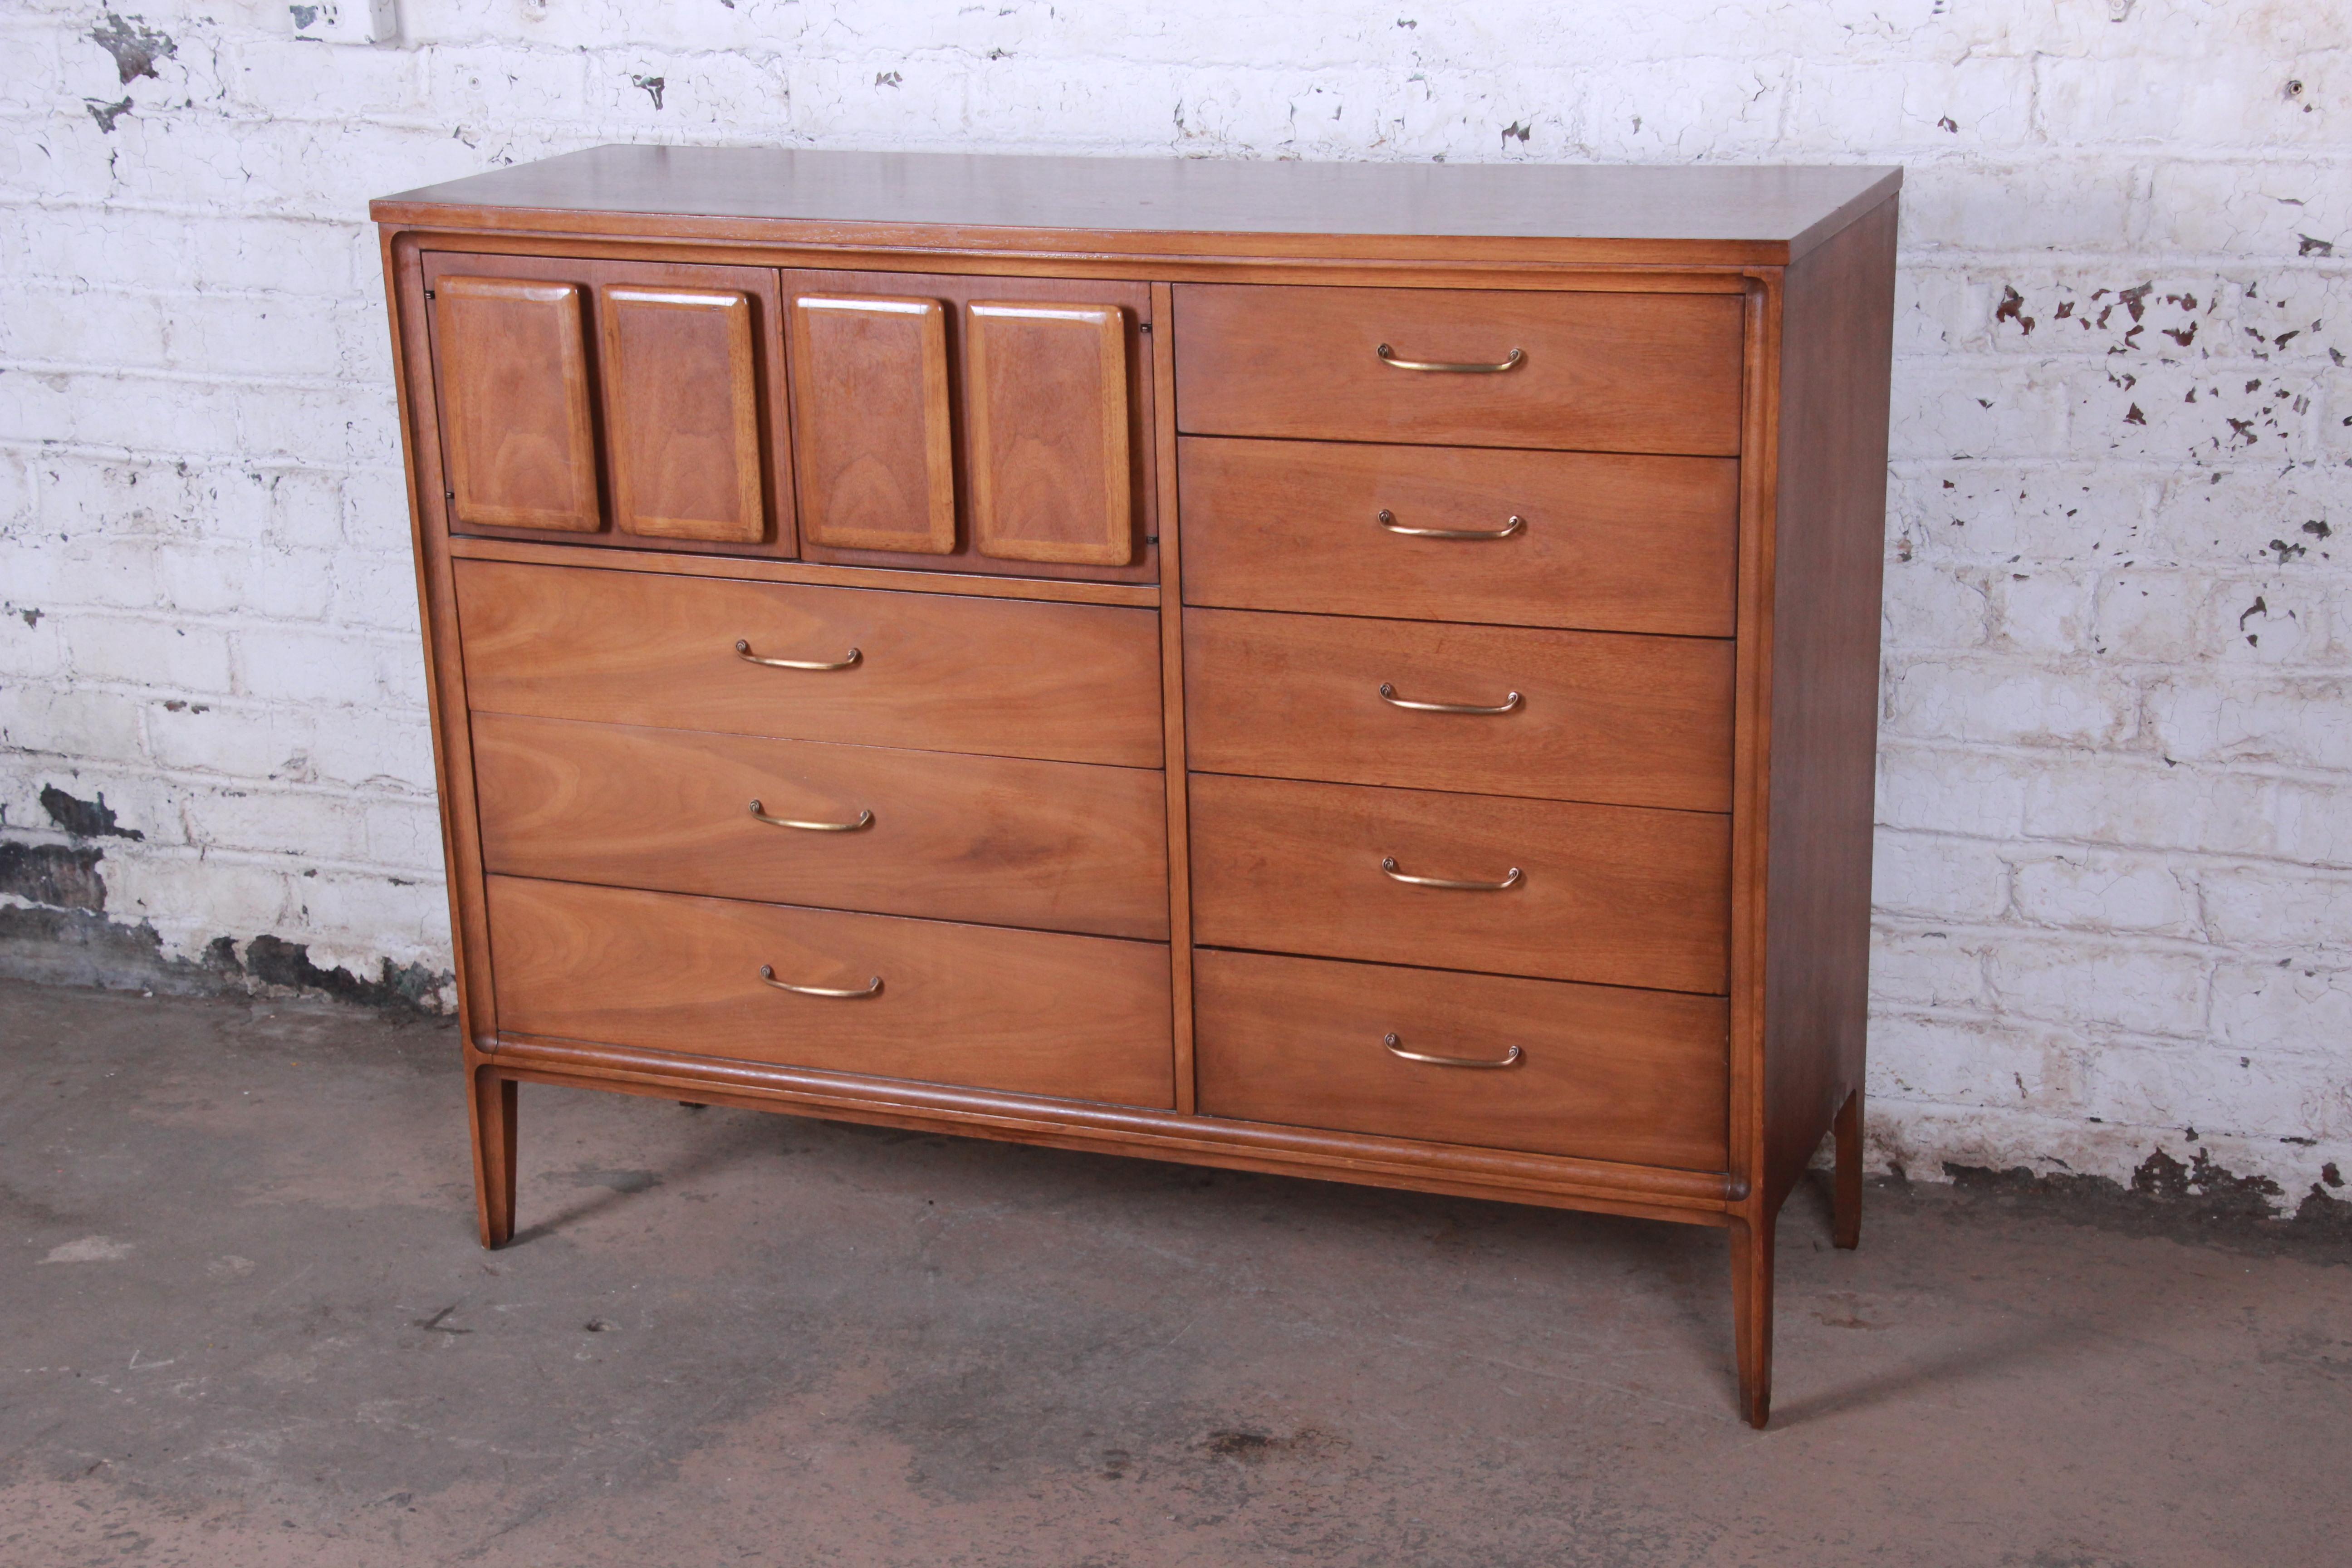 A stunning Mid-Century Modern walnut magna gentleman's chest from the Forward '70 line by Broyhill Premier. The dresser features gorgeous walnut wood grain and sleek midcentury design. It offers ample storage, with eight dovetailed drawers and three